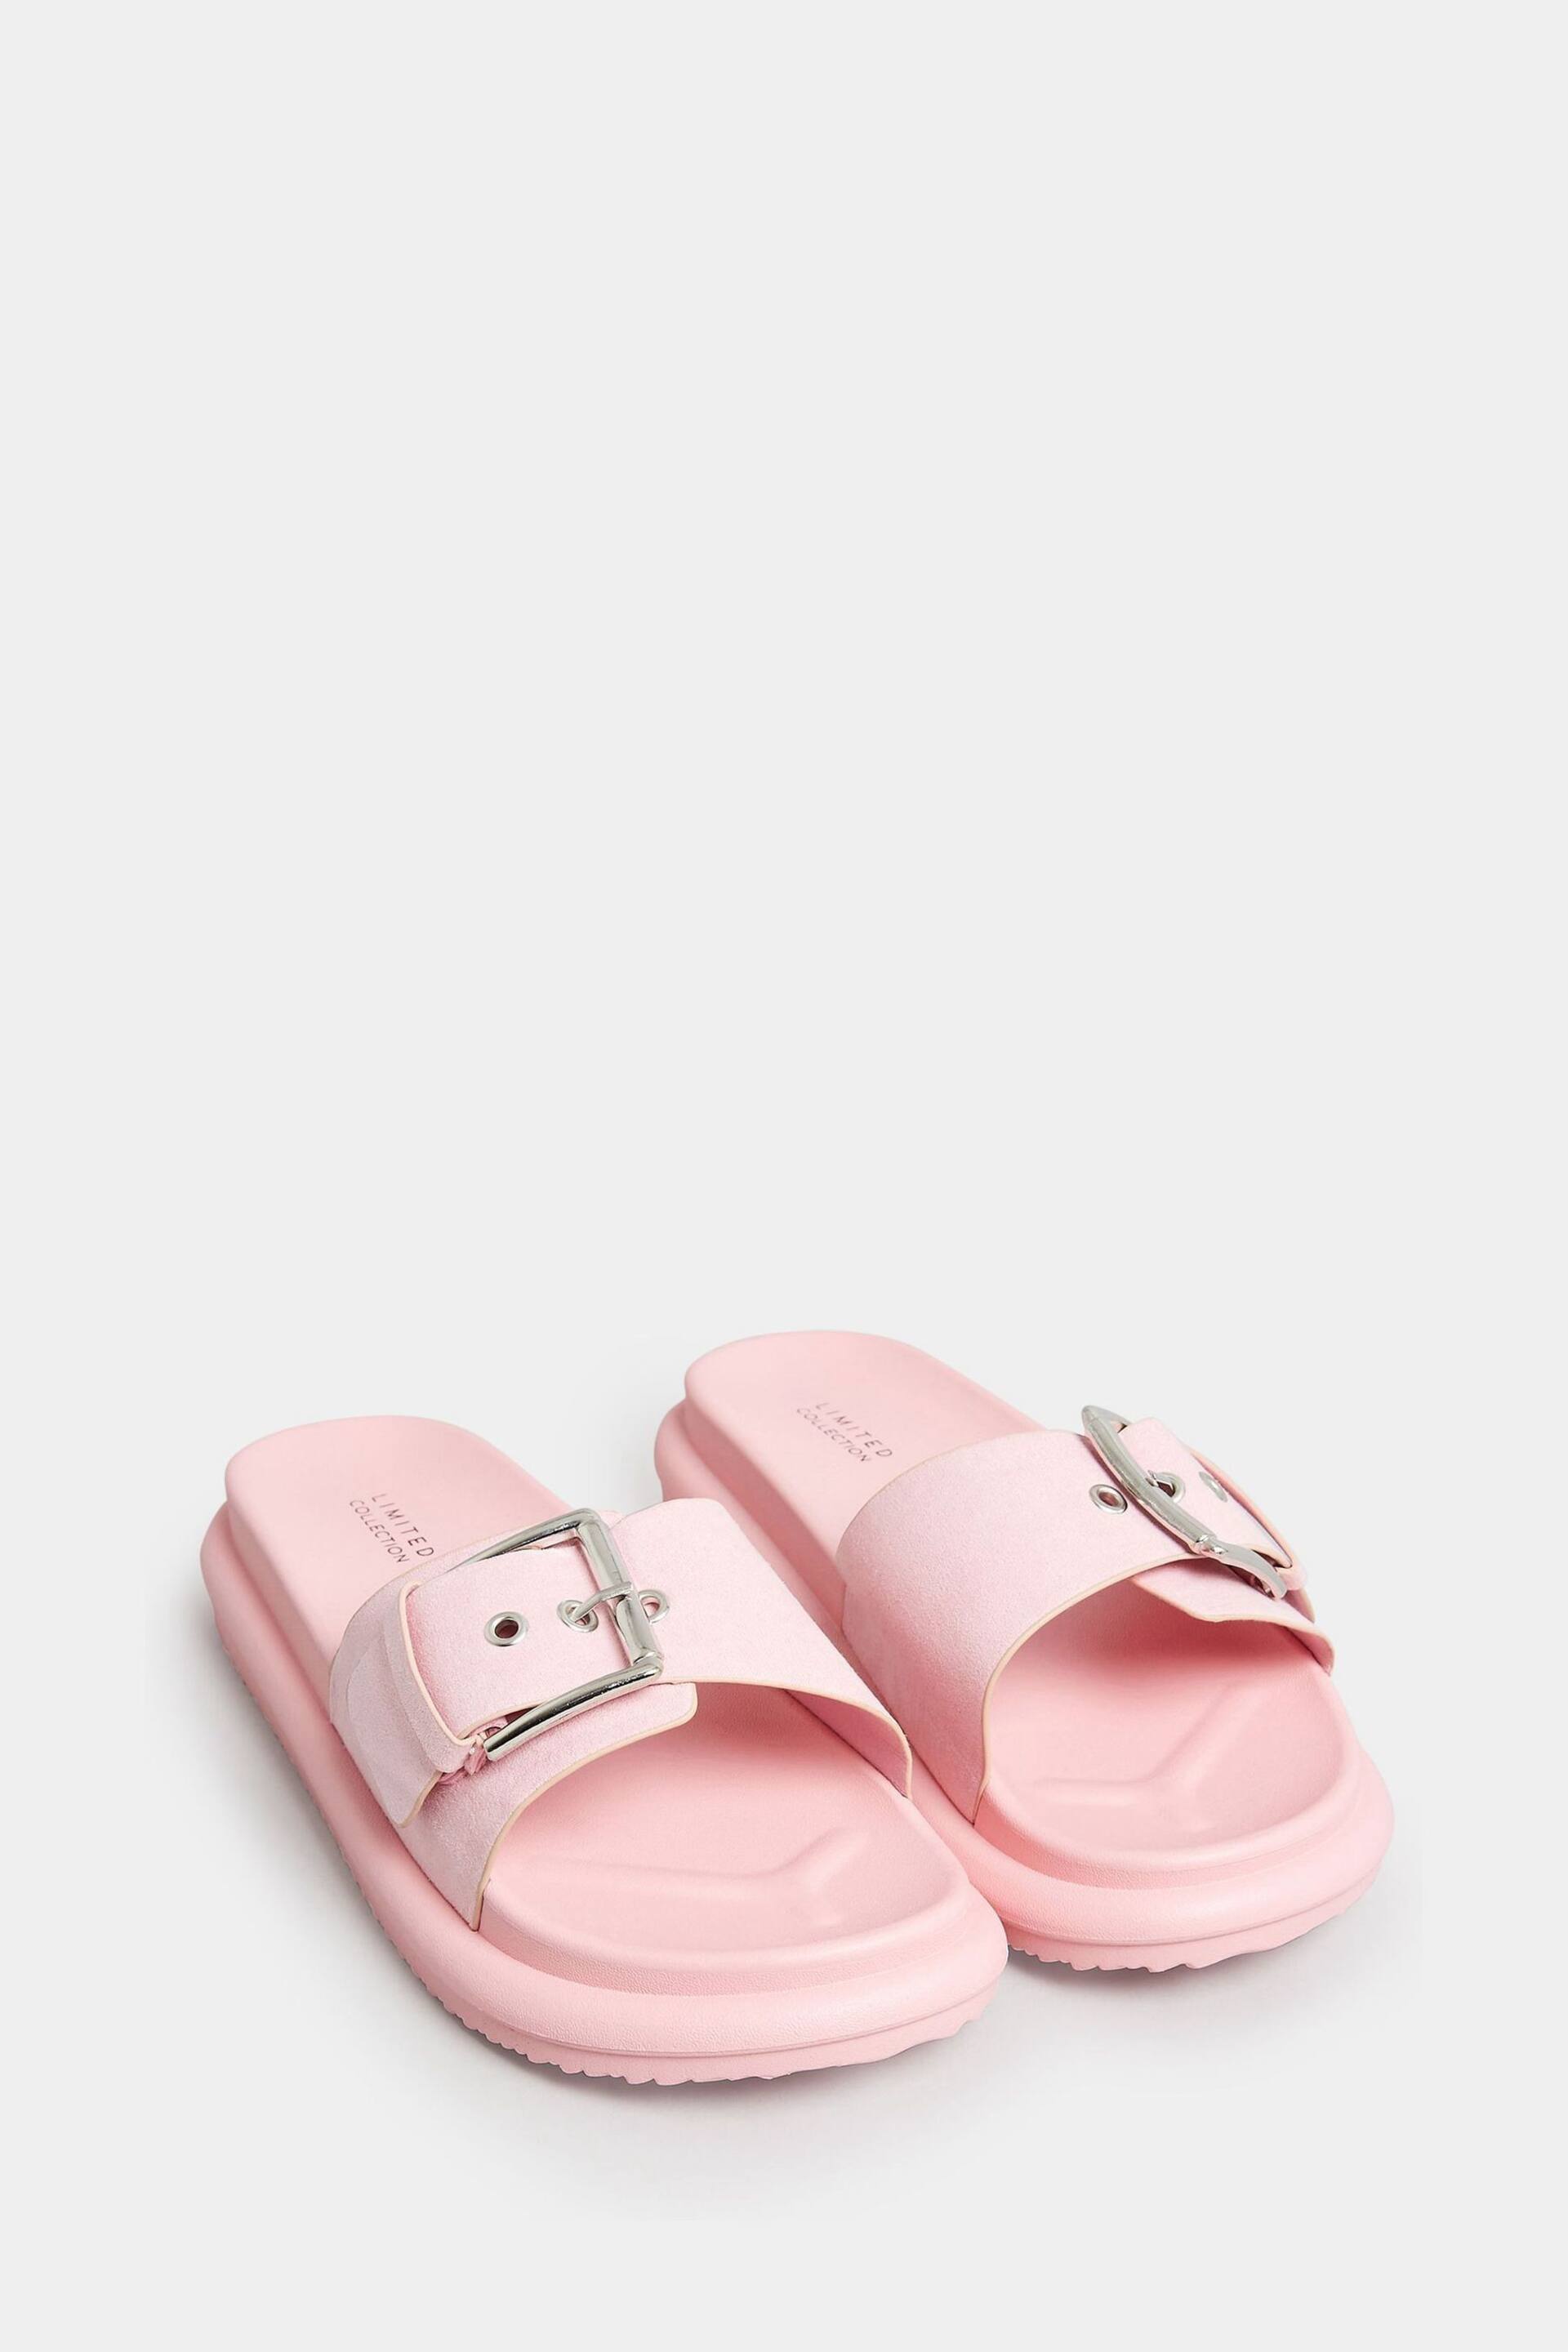 Yours Curve Pink Wide Fit Wide Fit Diamante Flower Sandals - Image 3 of 5